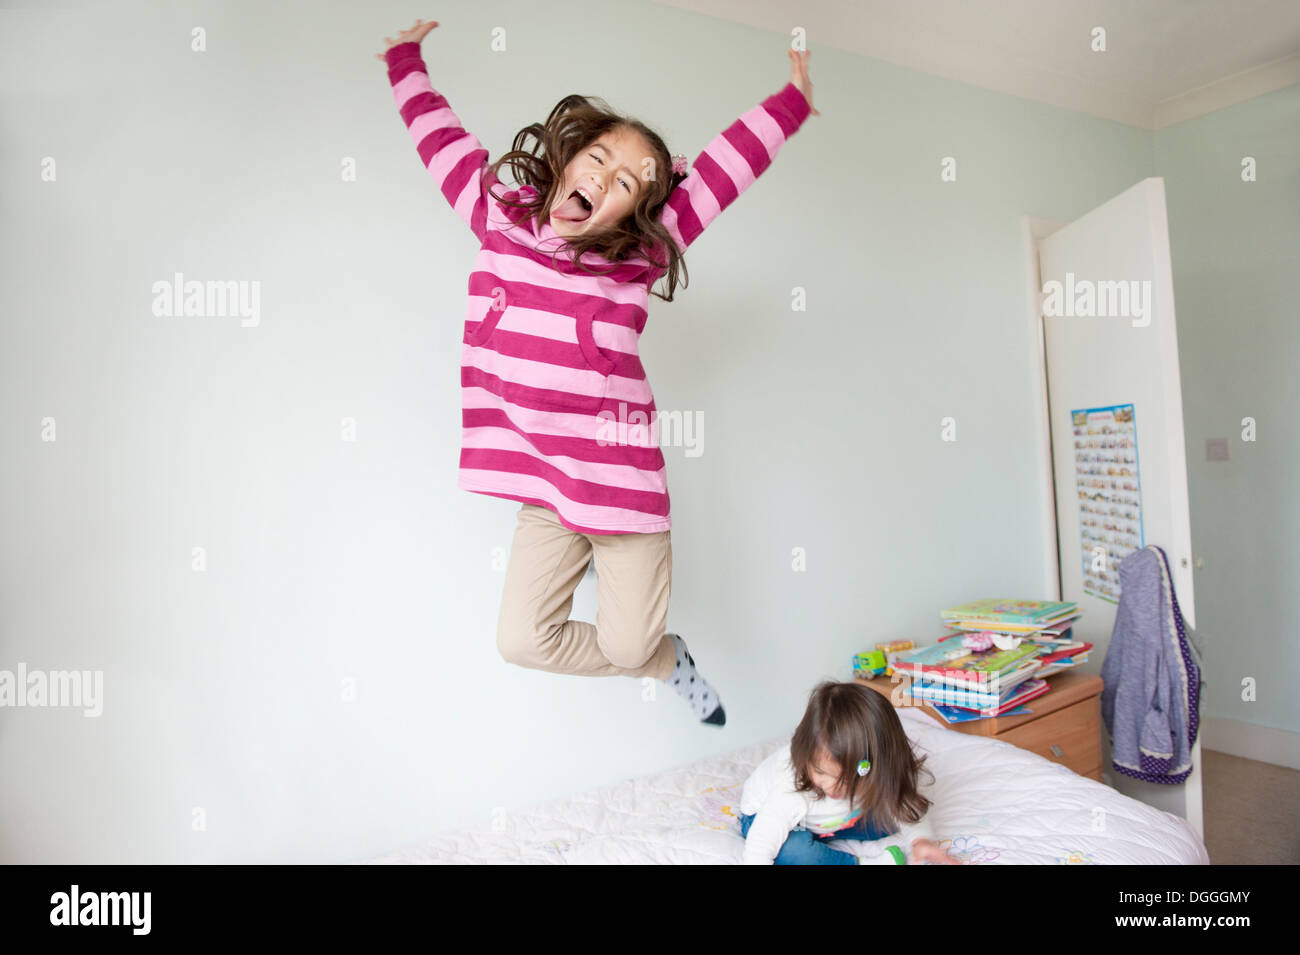 Girl jumping on bed and pulling face Stock Photo